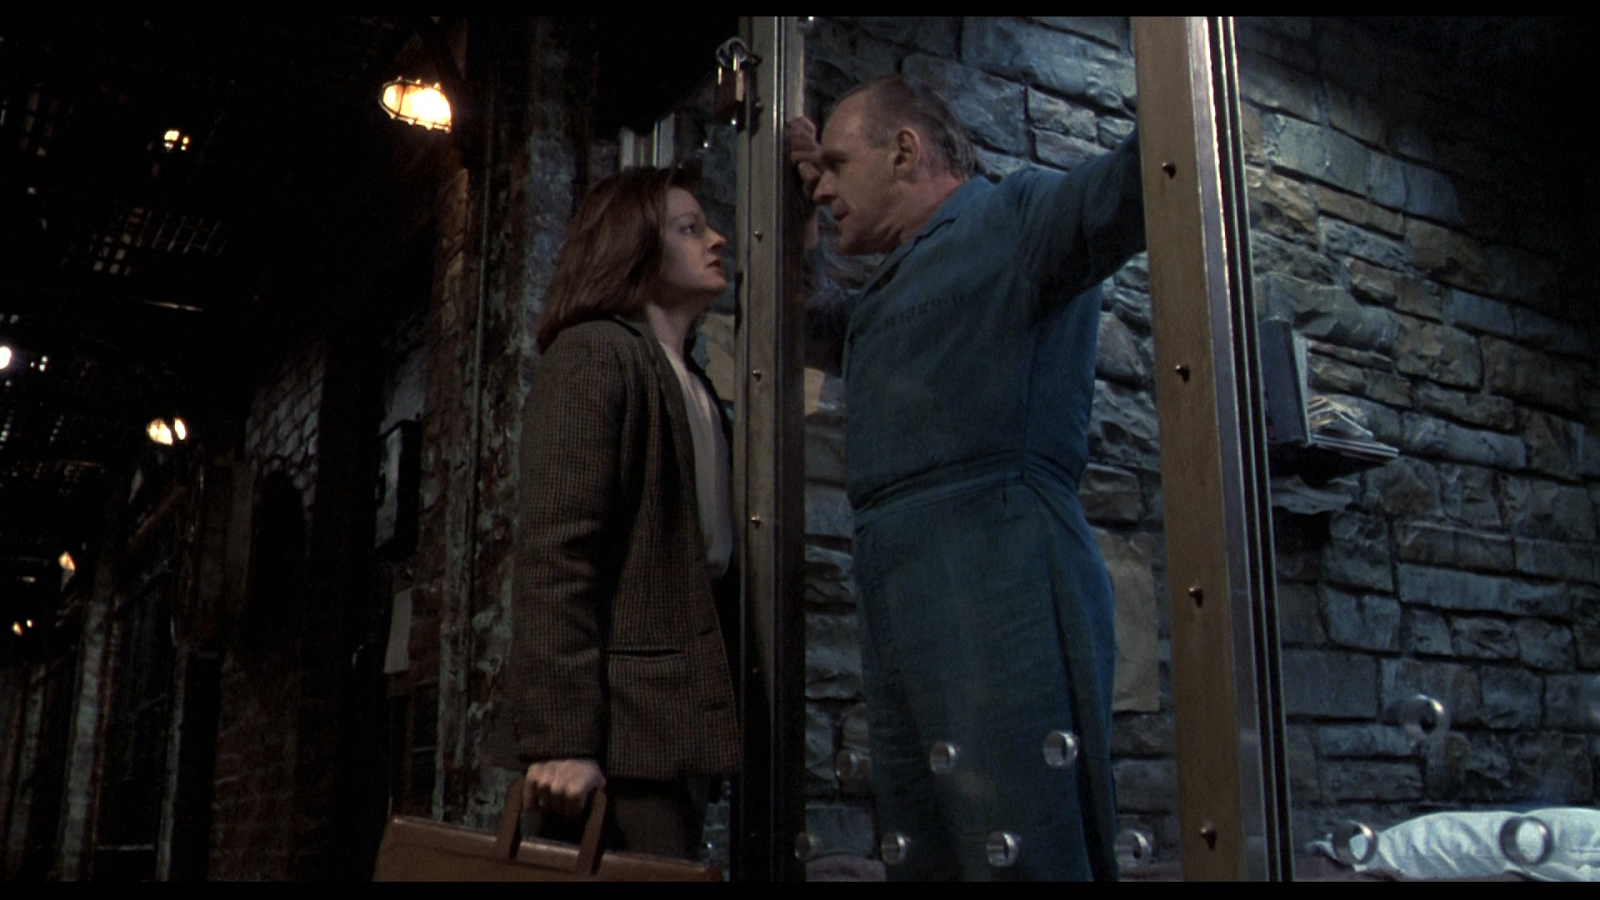 Happyotter: THE SILENCE OF THE LAMBS (1991)